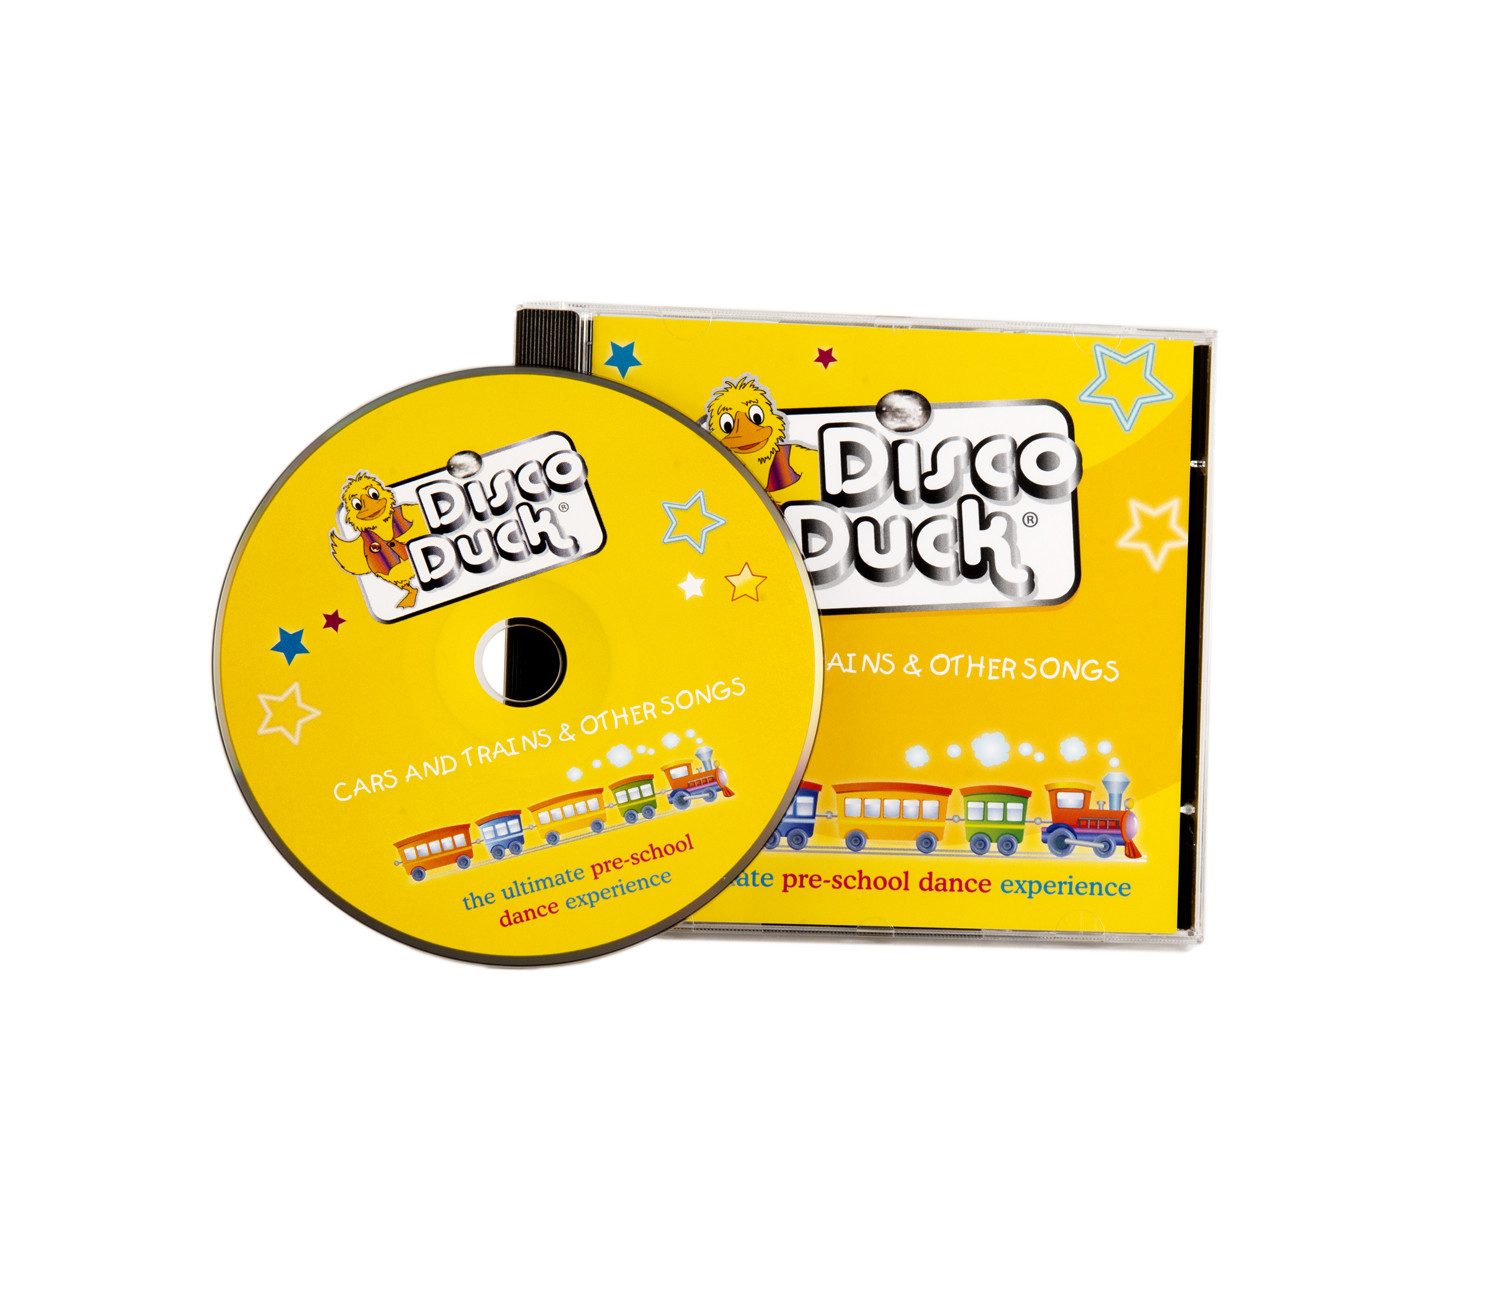 Disco Duck Album - Download and Dance - Special offer!